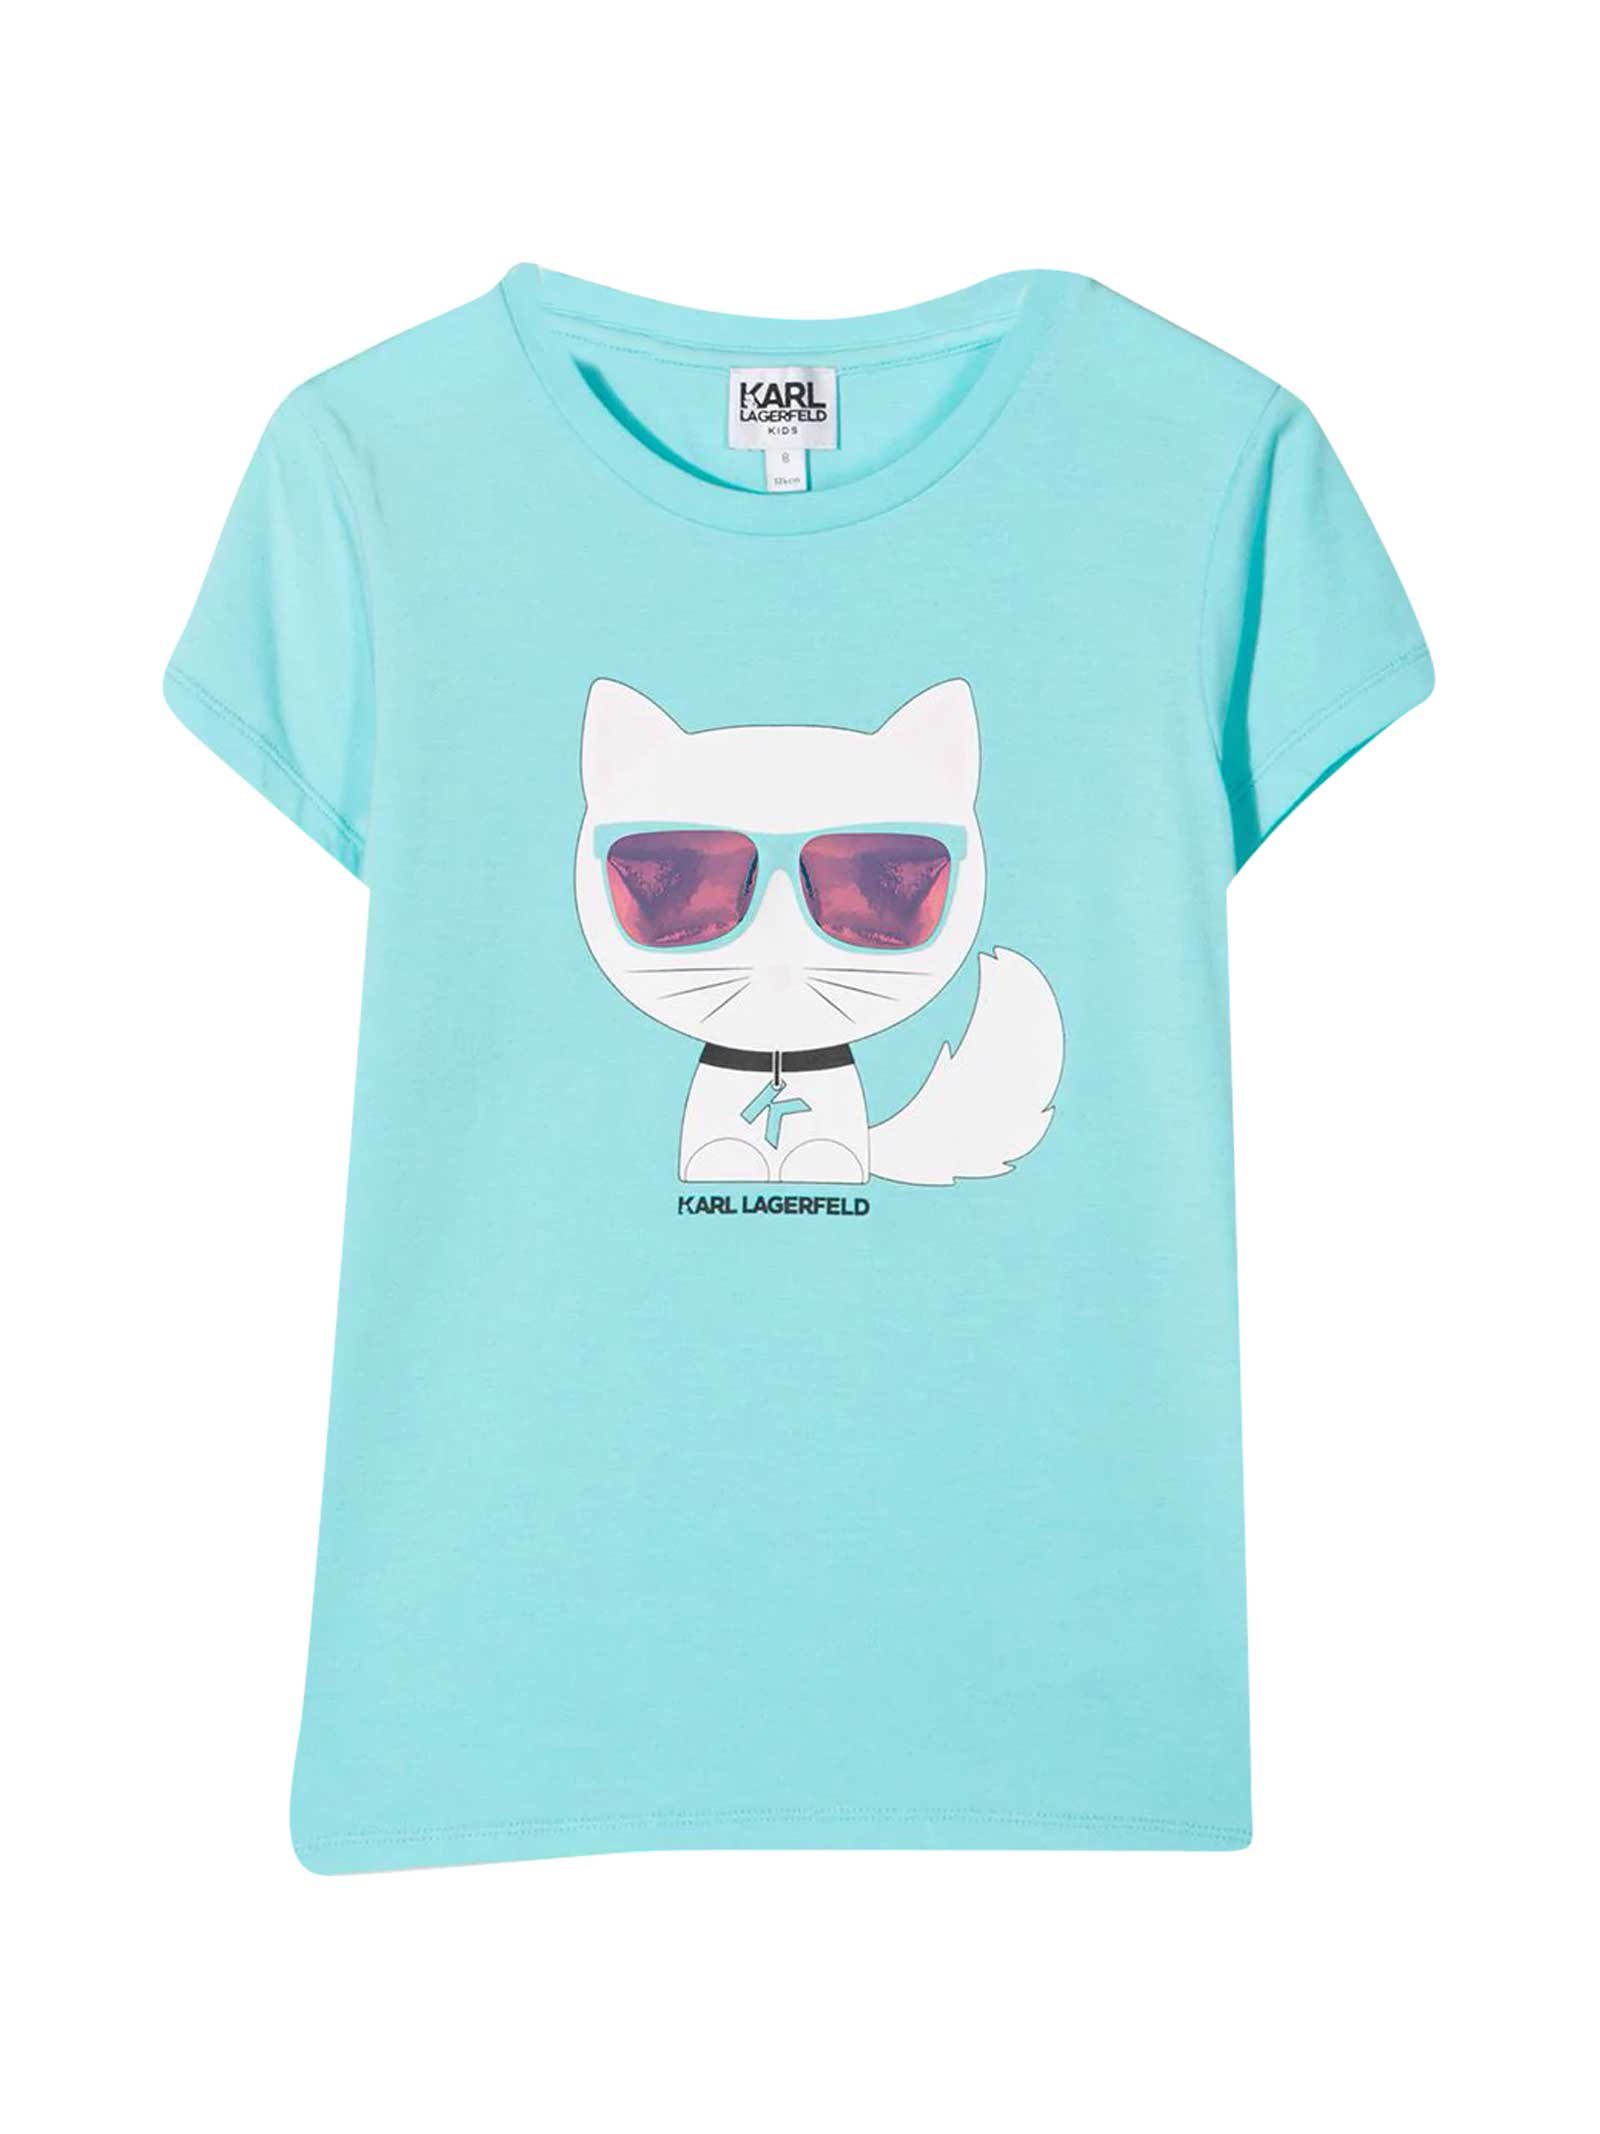 KARL LAGERFELD CHOUPETTE TEEN T-SHIRT WITH PRINT,11859477